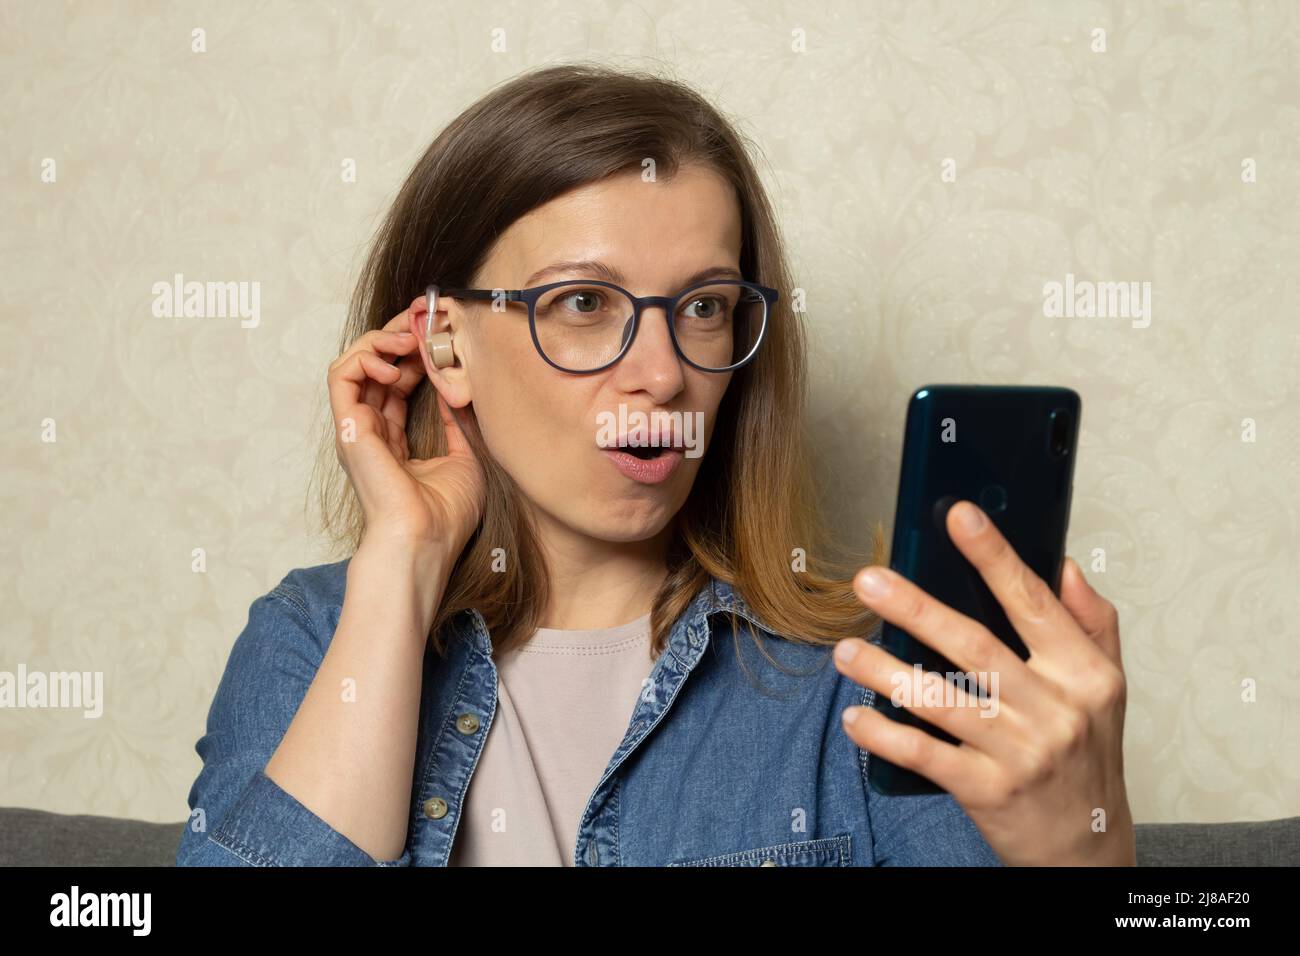 A woman is talking on the phone using a hearing aid on her ear to amplify the sound. Stock Photo